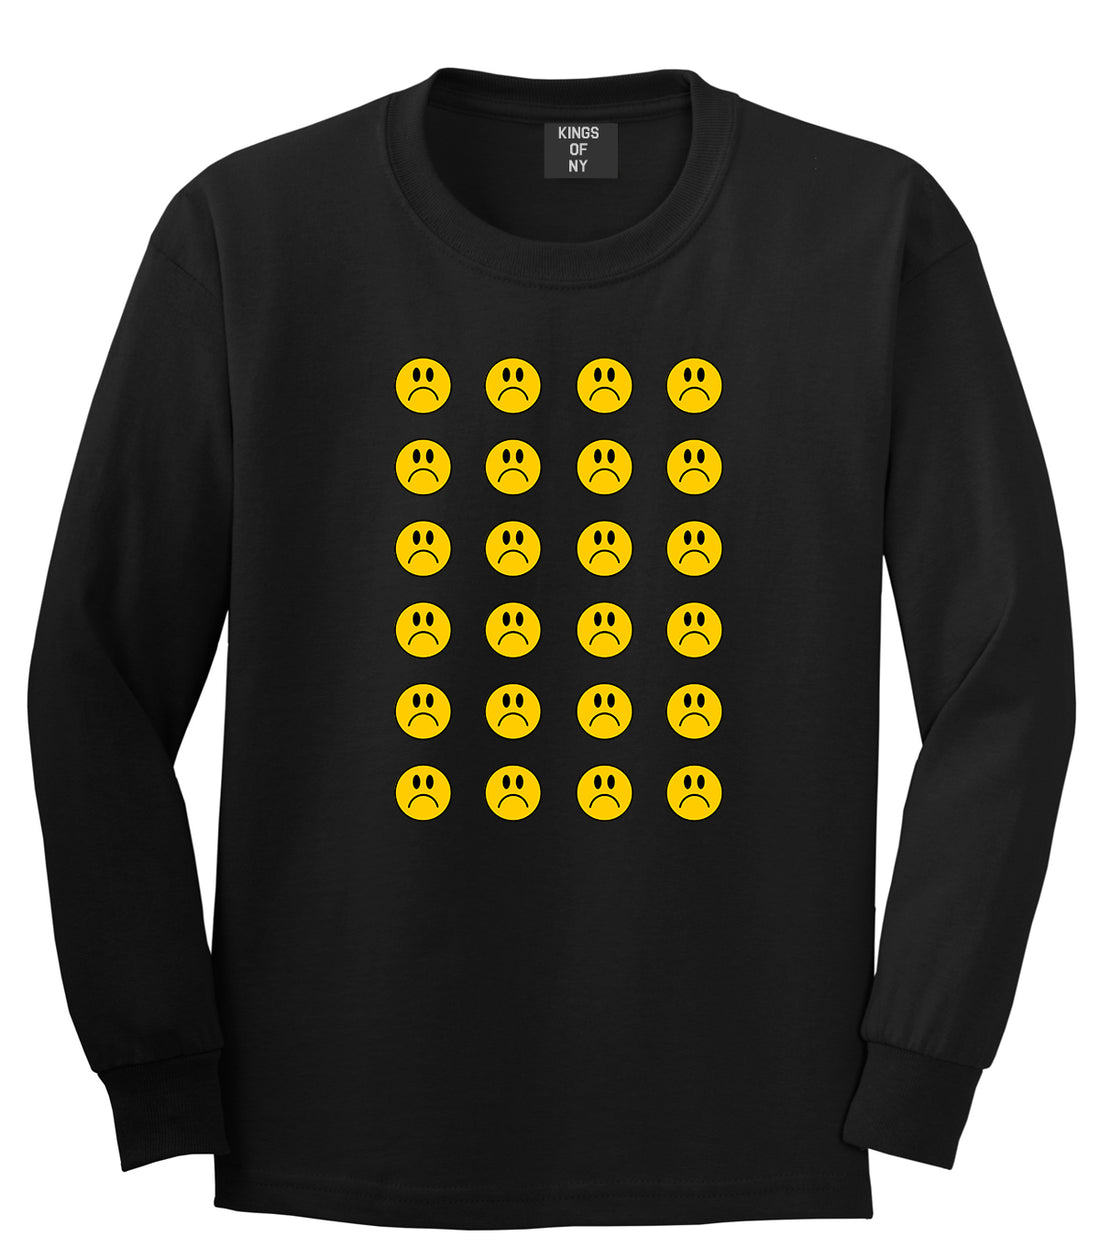 All Over Sad Face Mens Long Sleeve T-Shirt Black by Kings Of NY